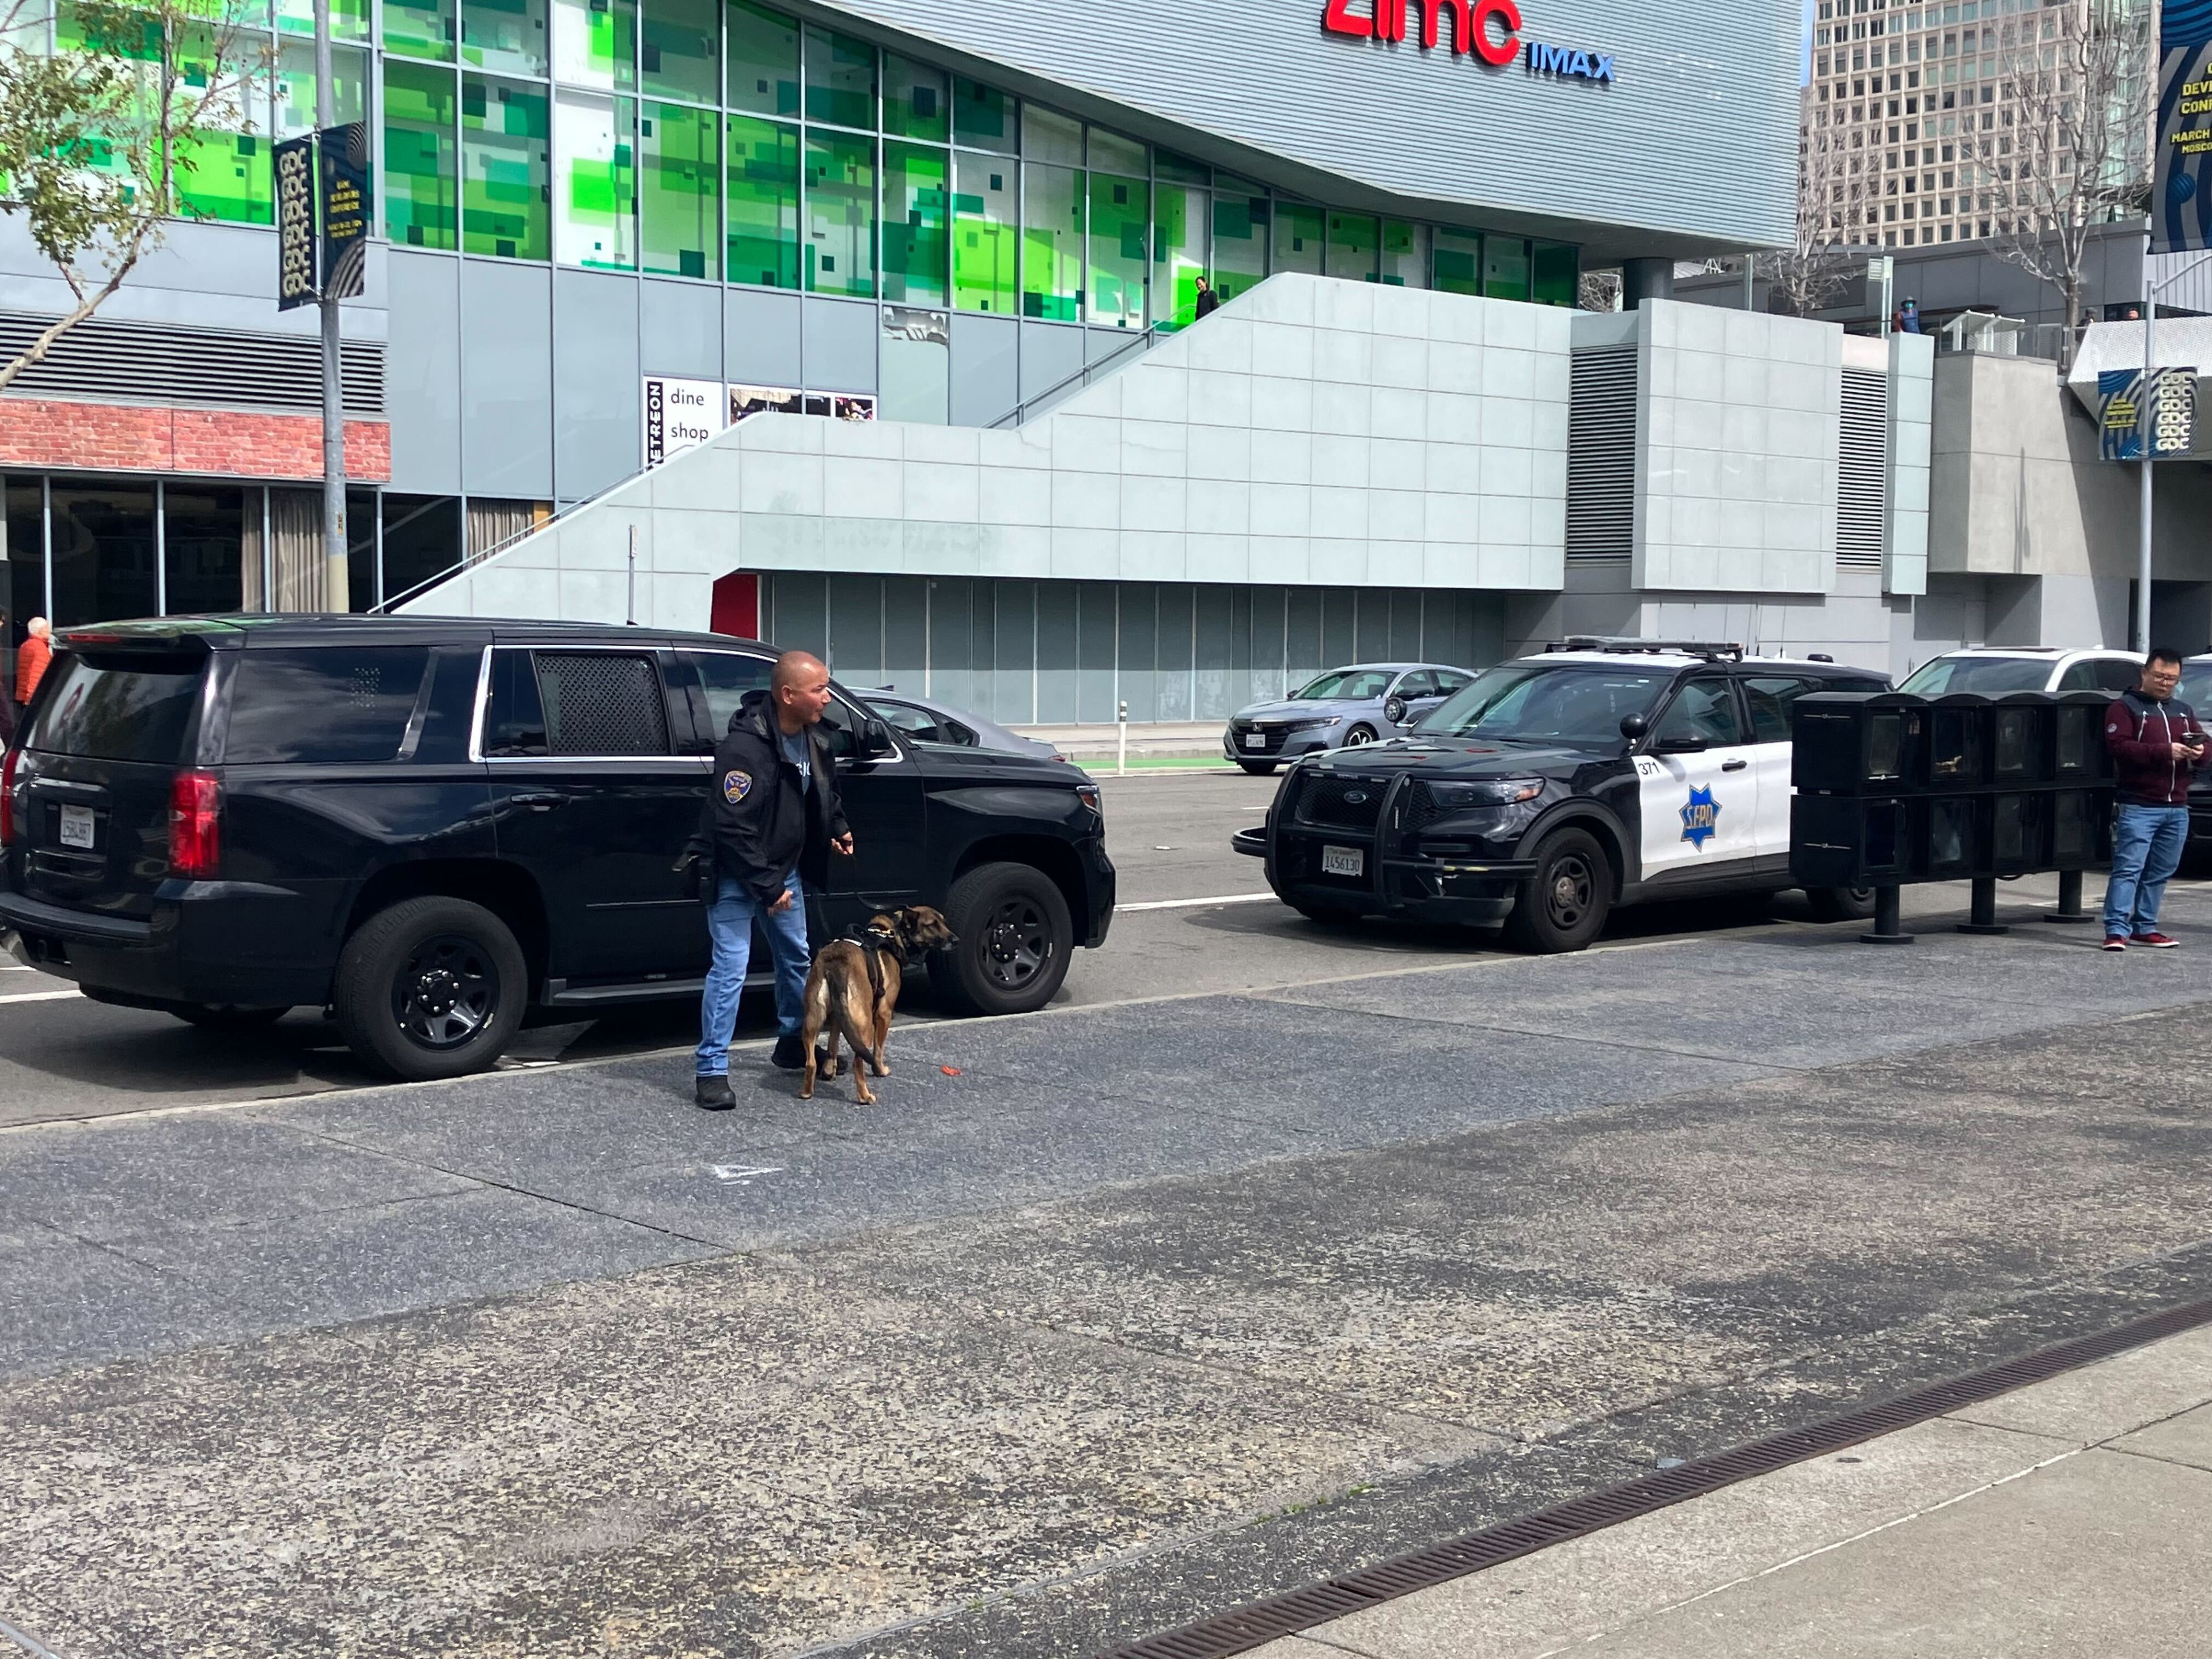 A security officer with a dog is walking beside a black SUV, with a police car and modern buildings in the background.